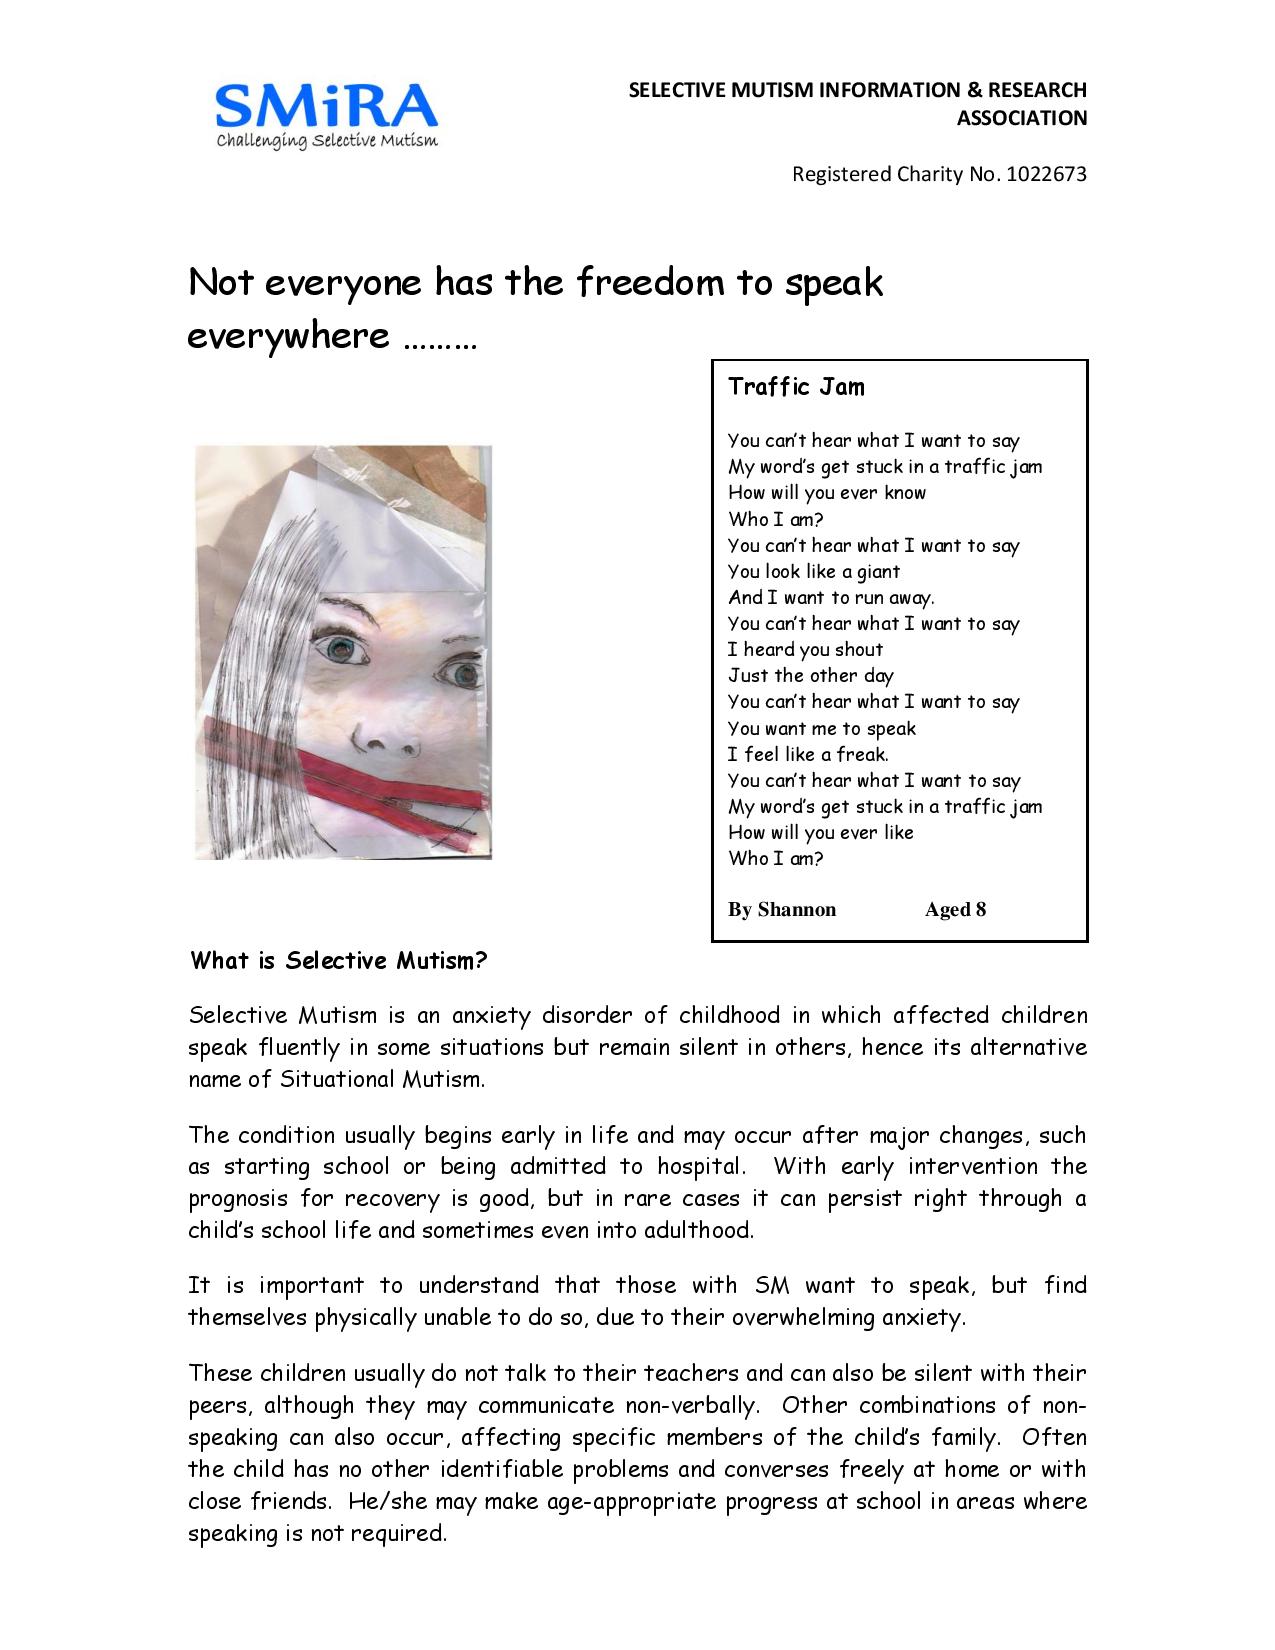 selective mutism awareness leaflet page 1